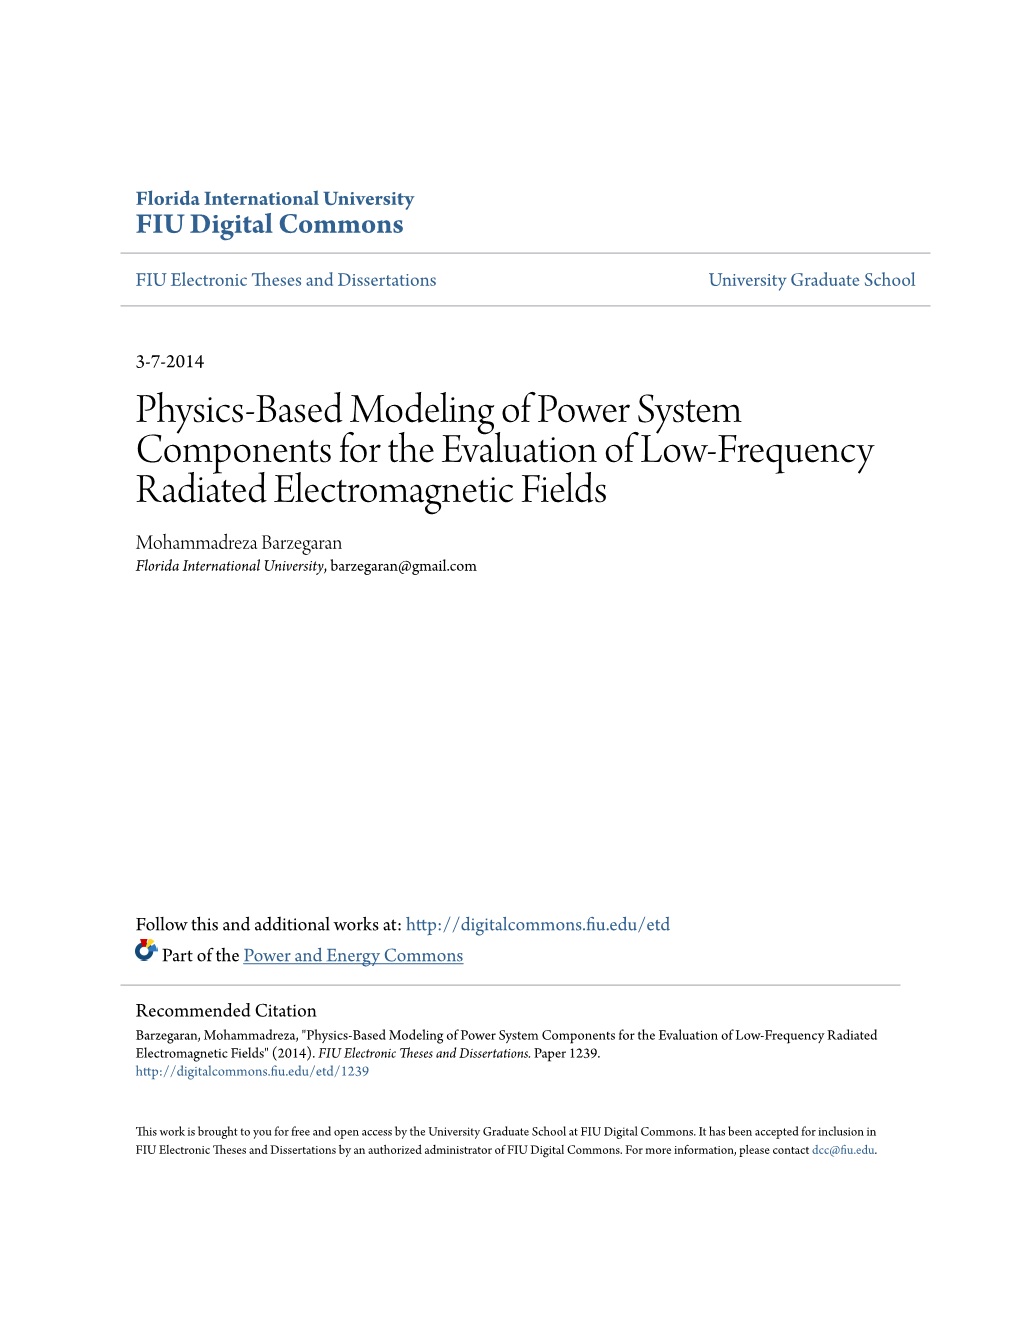 Physics-Based Modeling of Power System Components for The